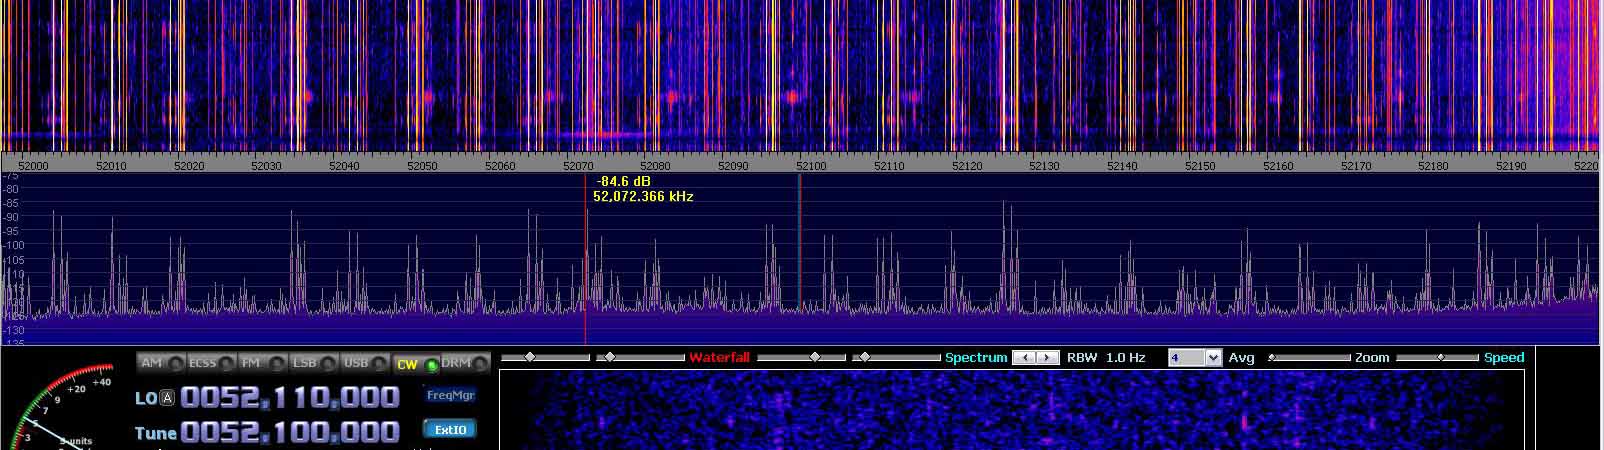 2014-07-04 52.100 MHz +- 100 kHz - Strong Es - 4-el dipole array with ends to St P - (c) OH7HJ.JPG